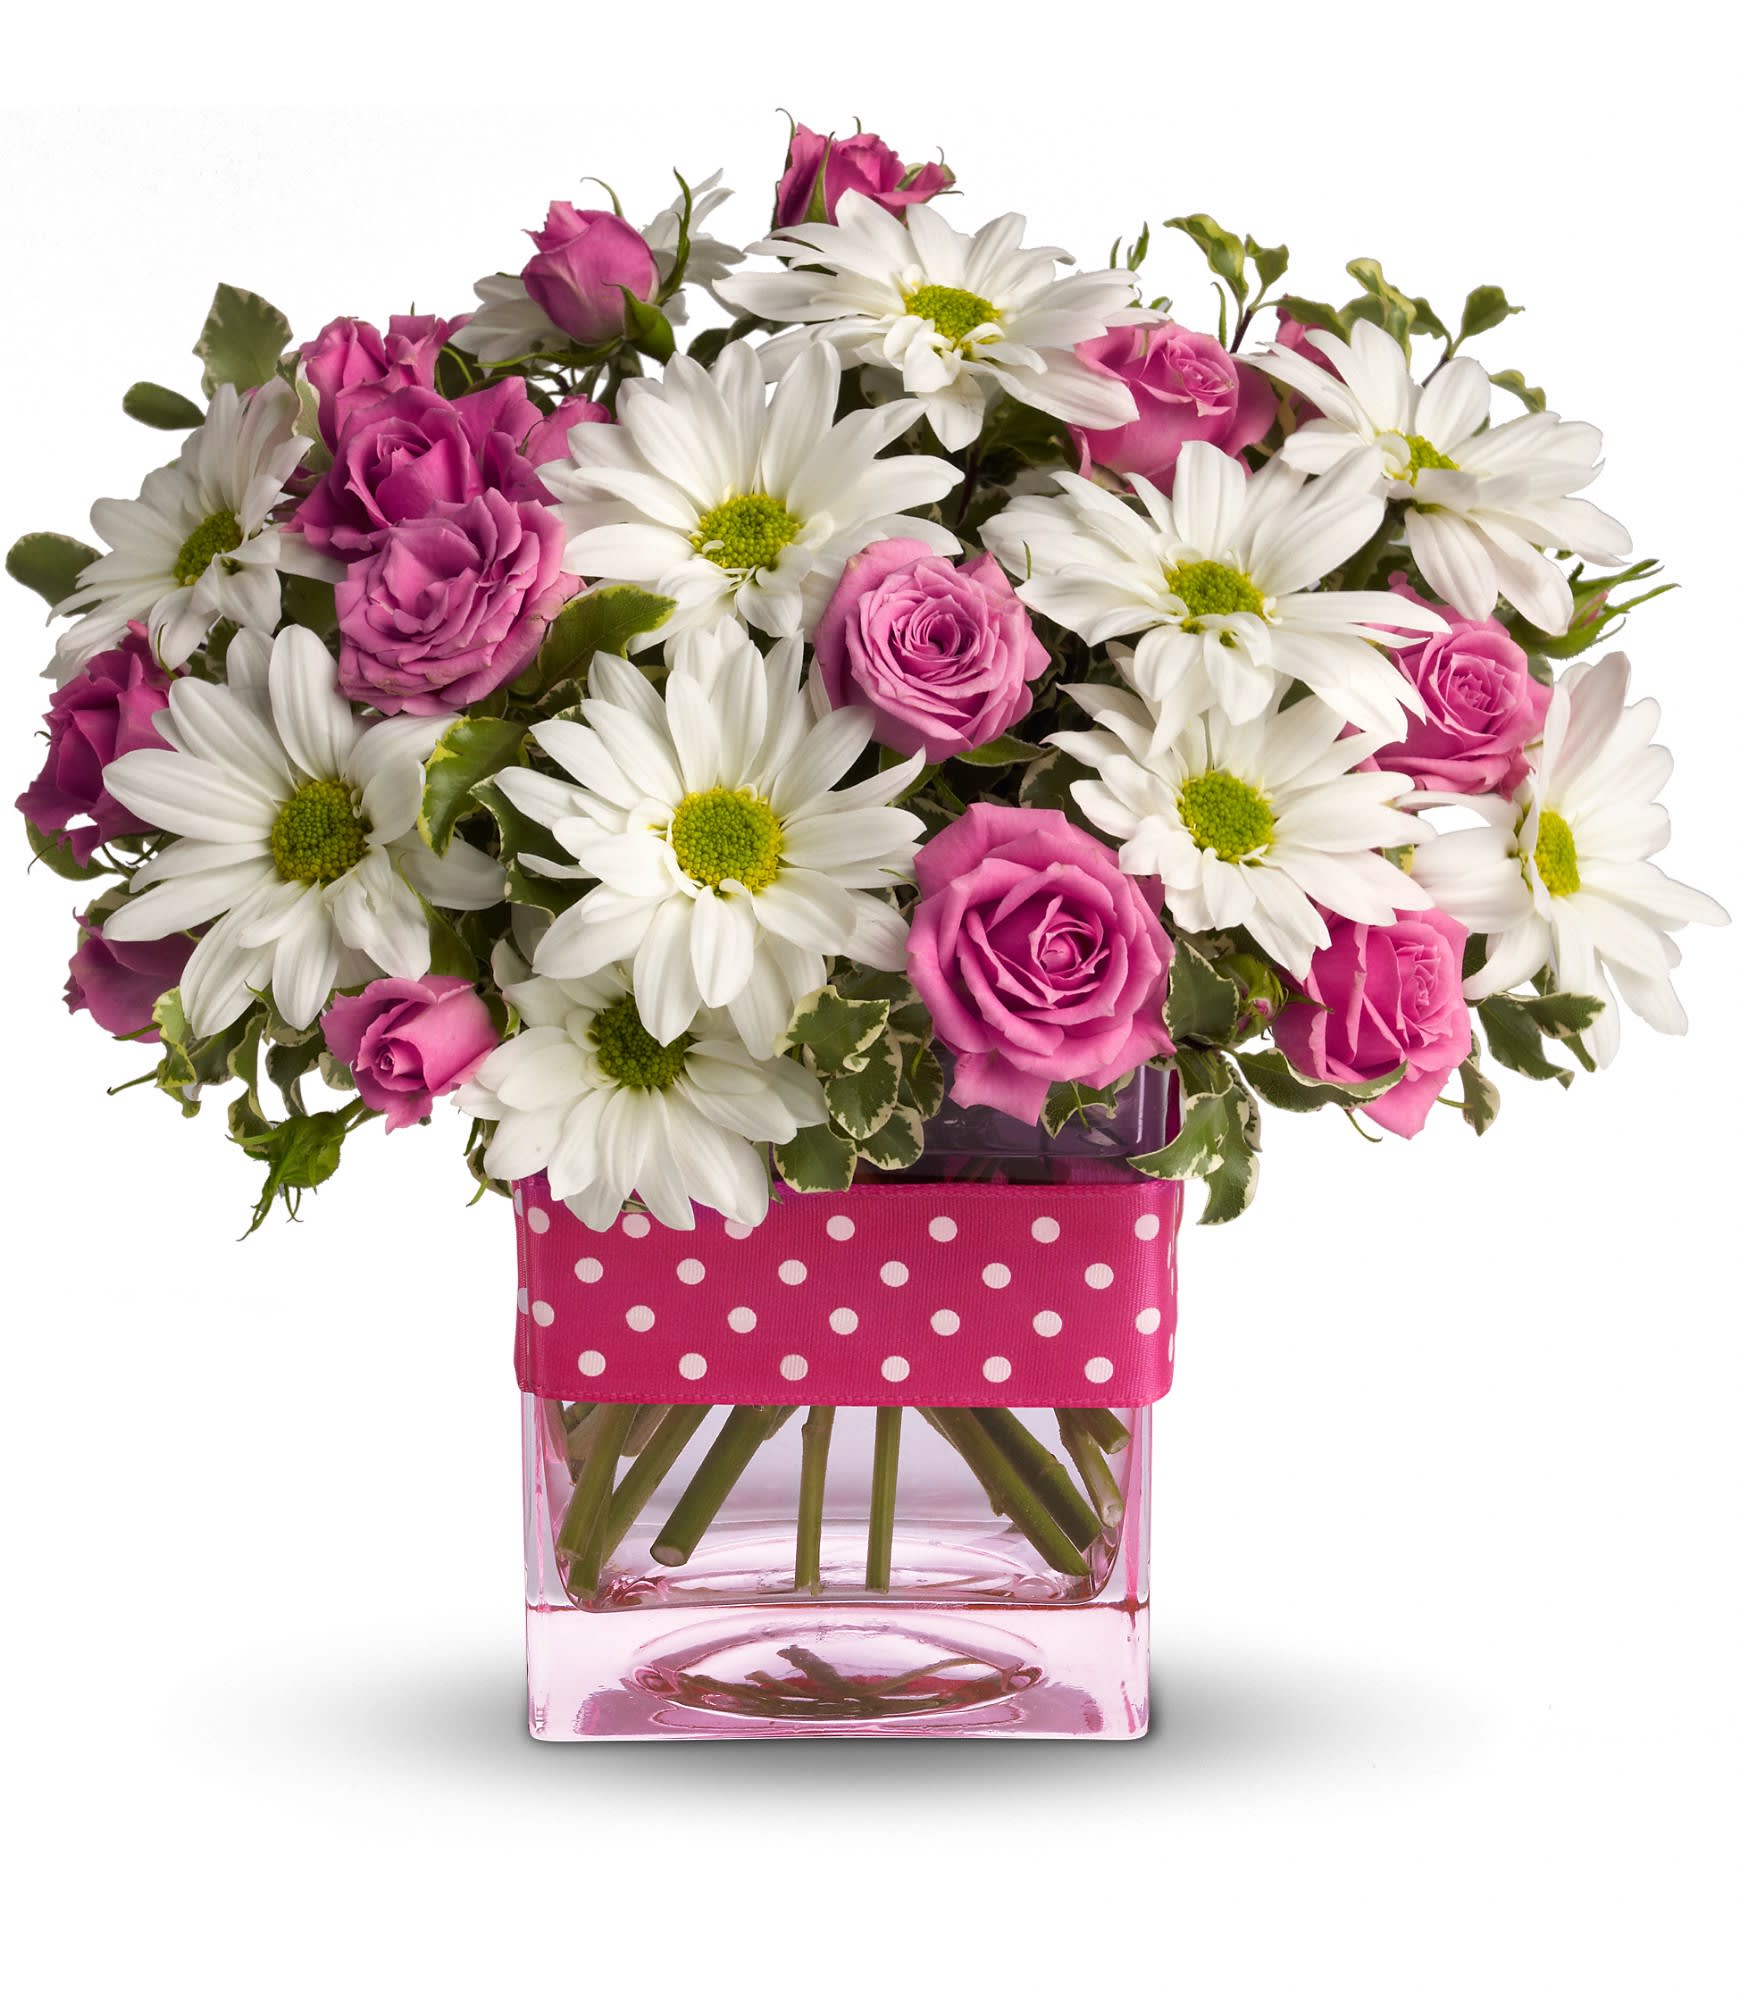 Polka Dots and Posies - Polka dots and posies, they're the perfect pair. Well, at least in this pretty arrangement they are. Just the right flowers in just the right vase all wrapped up inâ¦ you guessed it, just the right ribbon. 